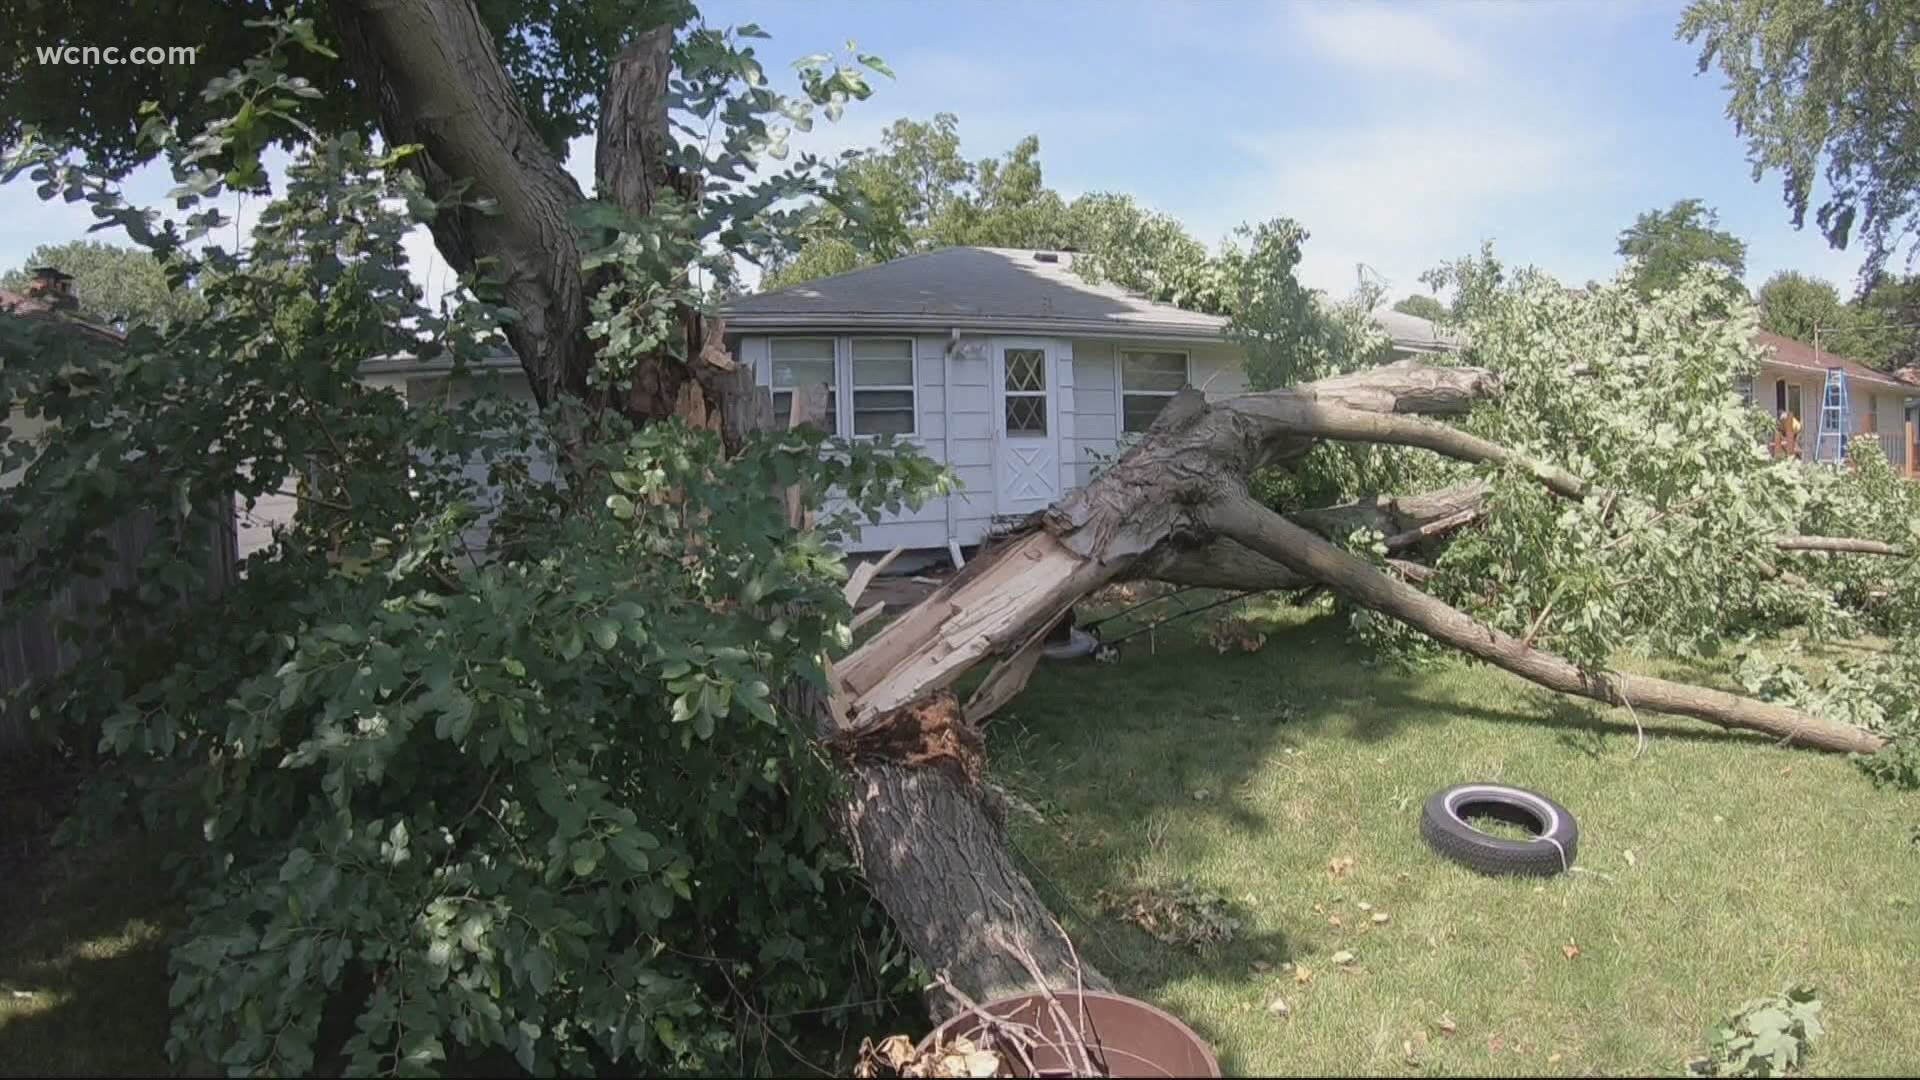 Iisha Scott and Chris Mulcahy discuss the dangers of high winds, and how you can prepare for their impacts.